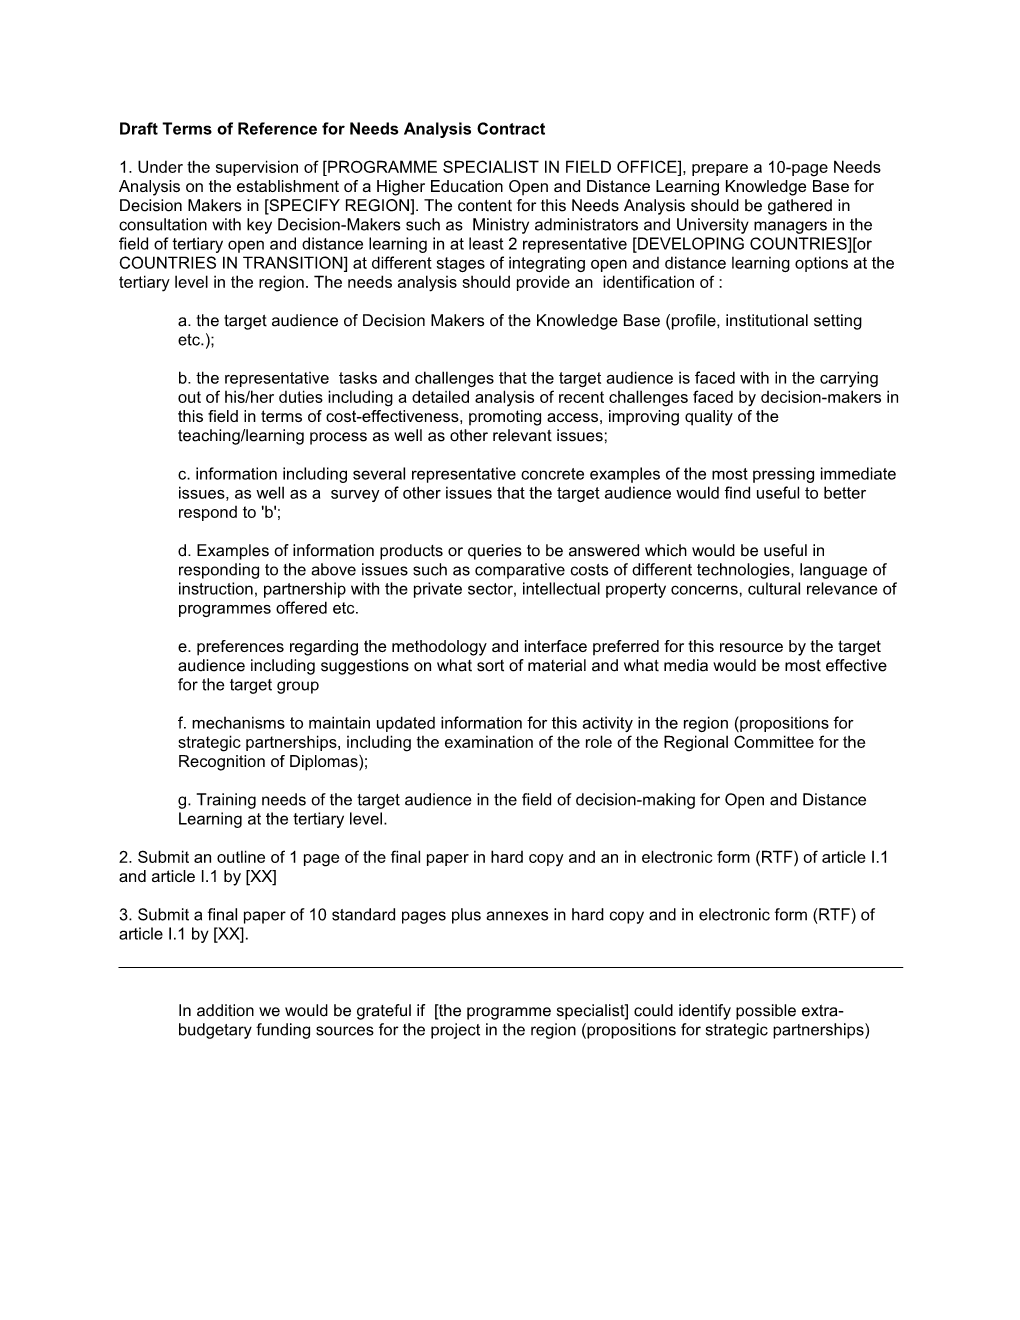 Draft Terms of Reference for Needs Analysis Contract